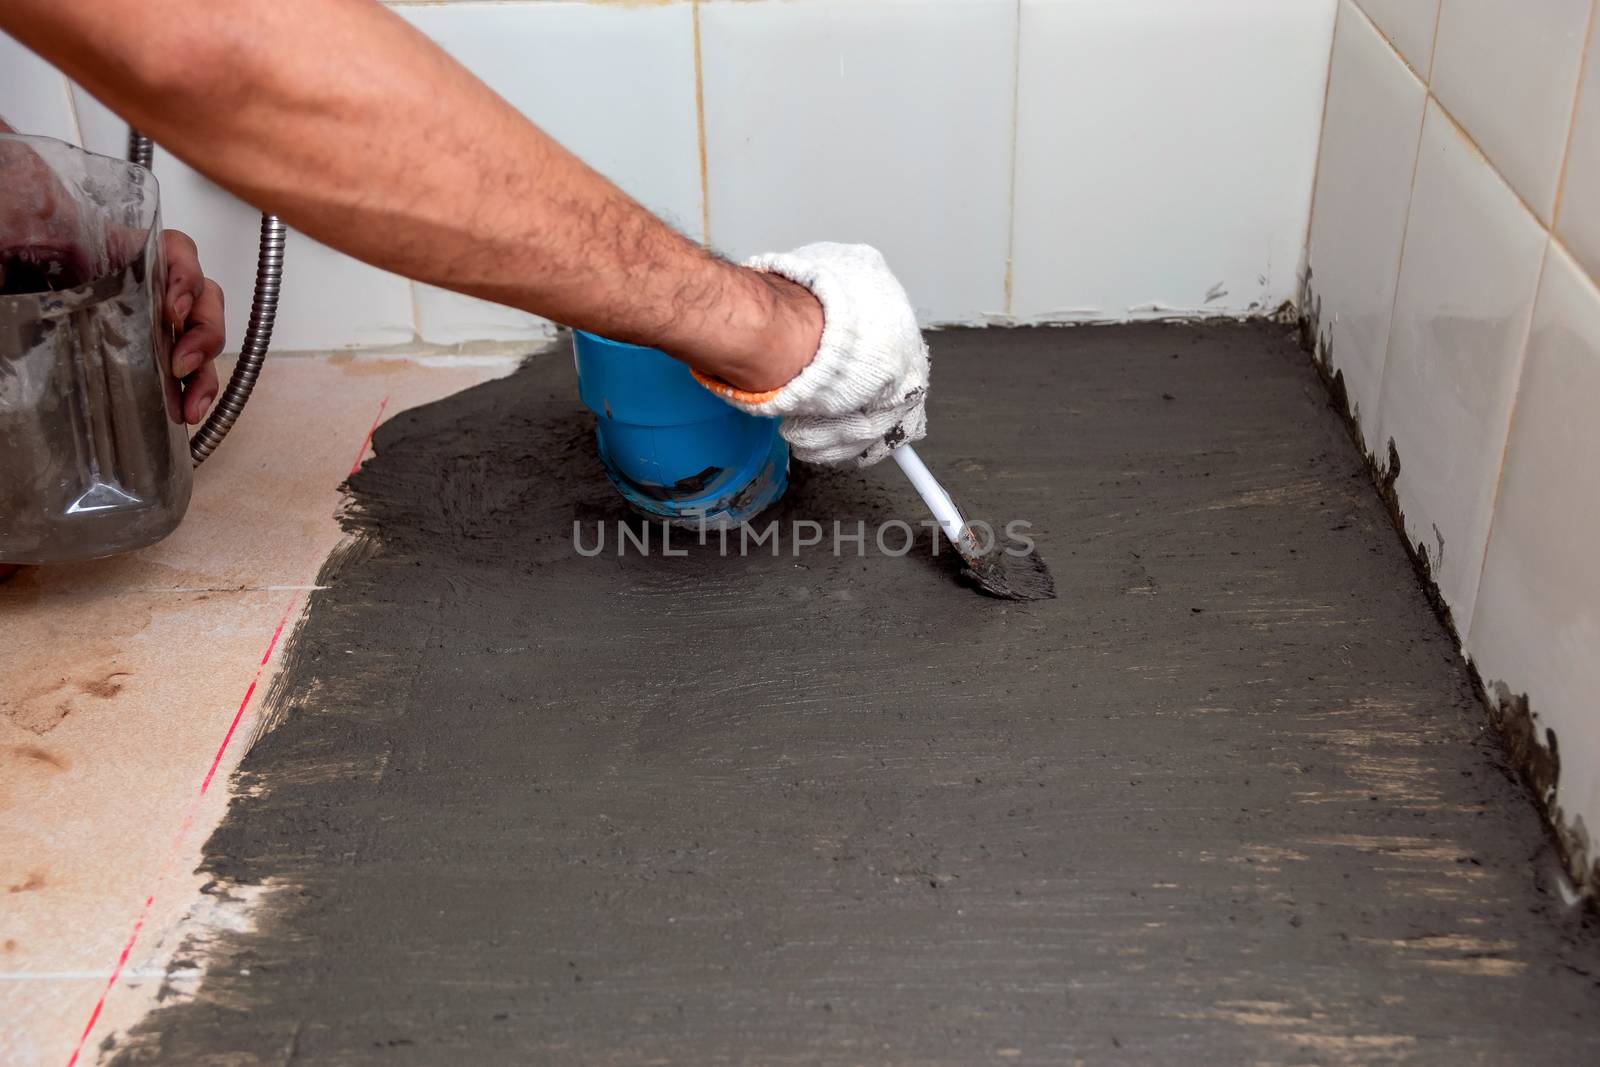 Construction workers are brushing waterproofing cement on tile floors in the bathroom.